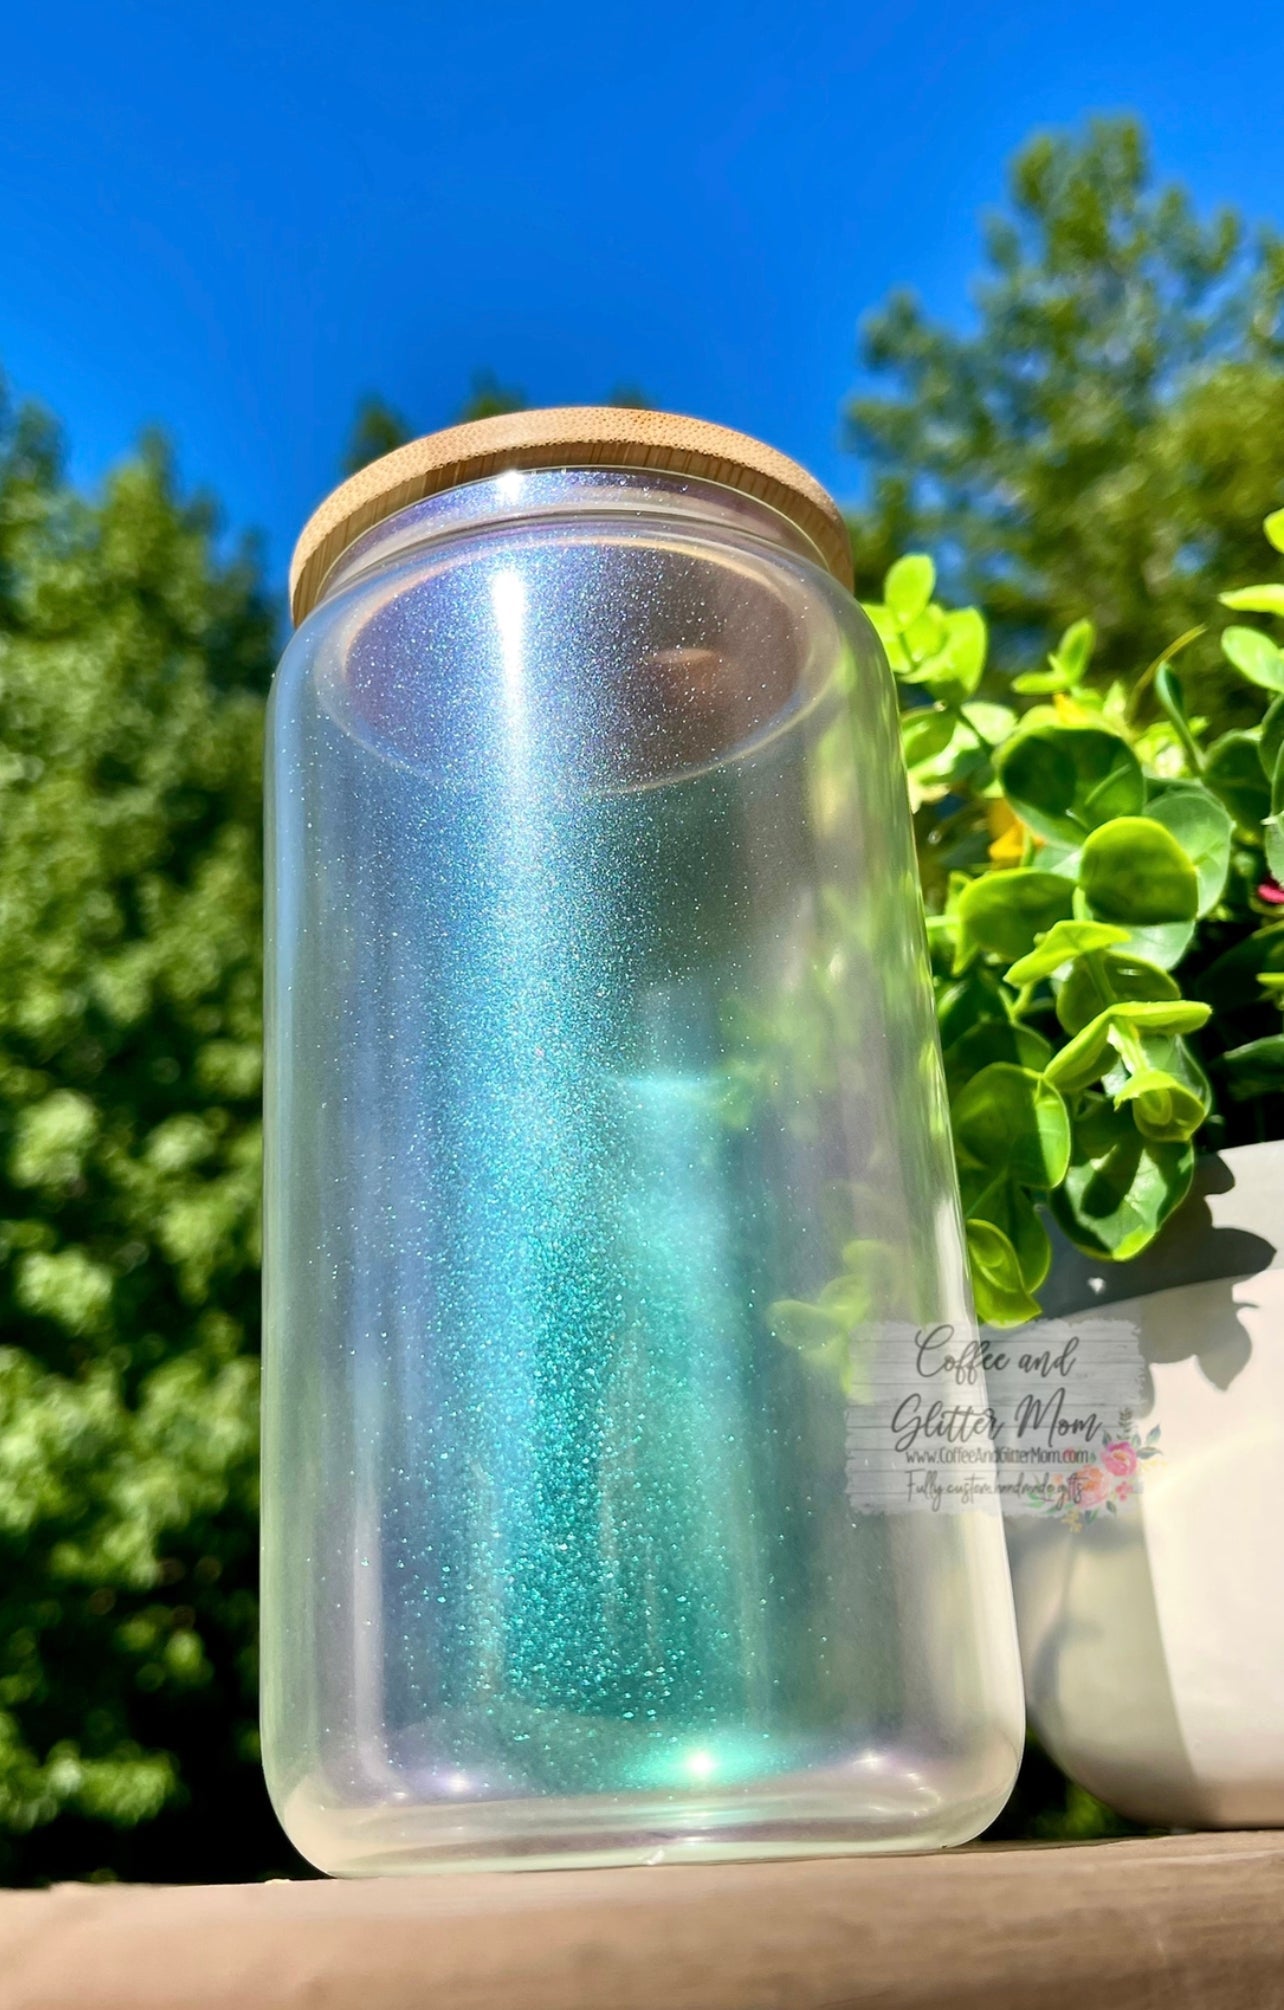 Daily Reminders (Clean Version) 16oz Iridescent Glass Can